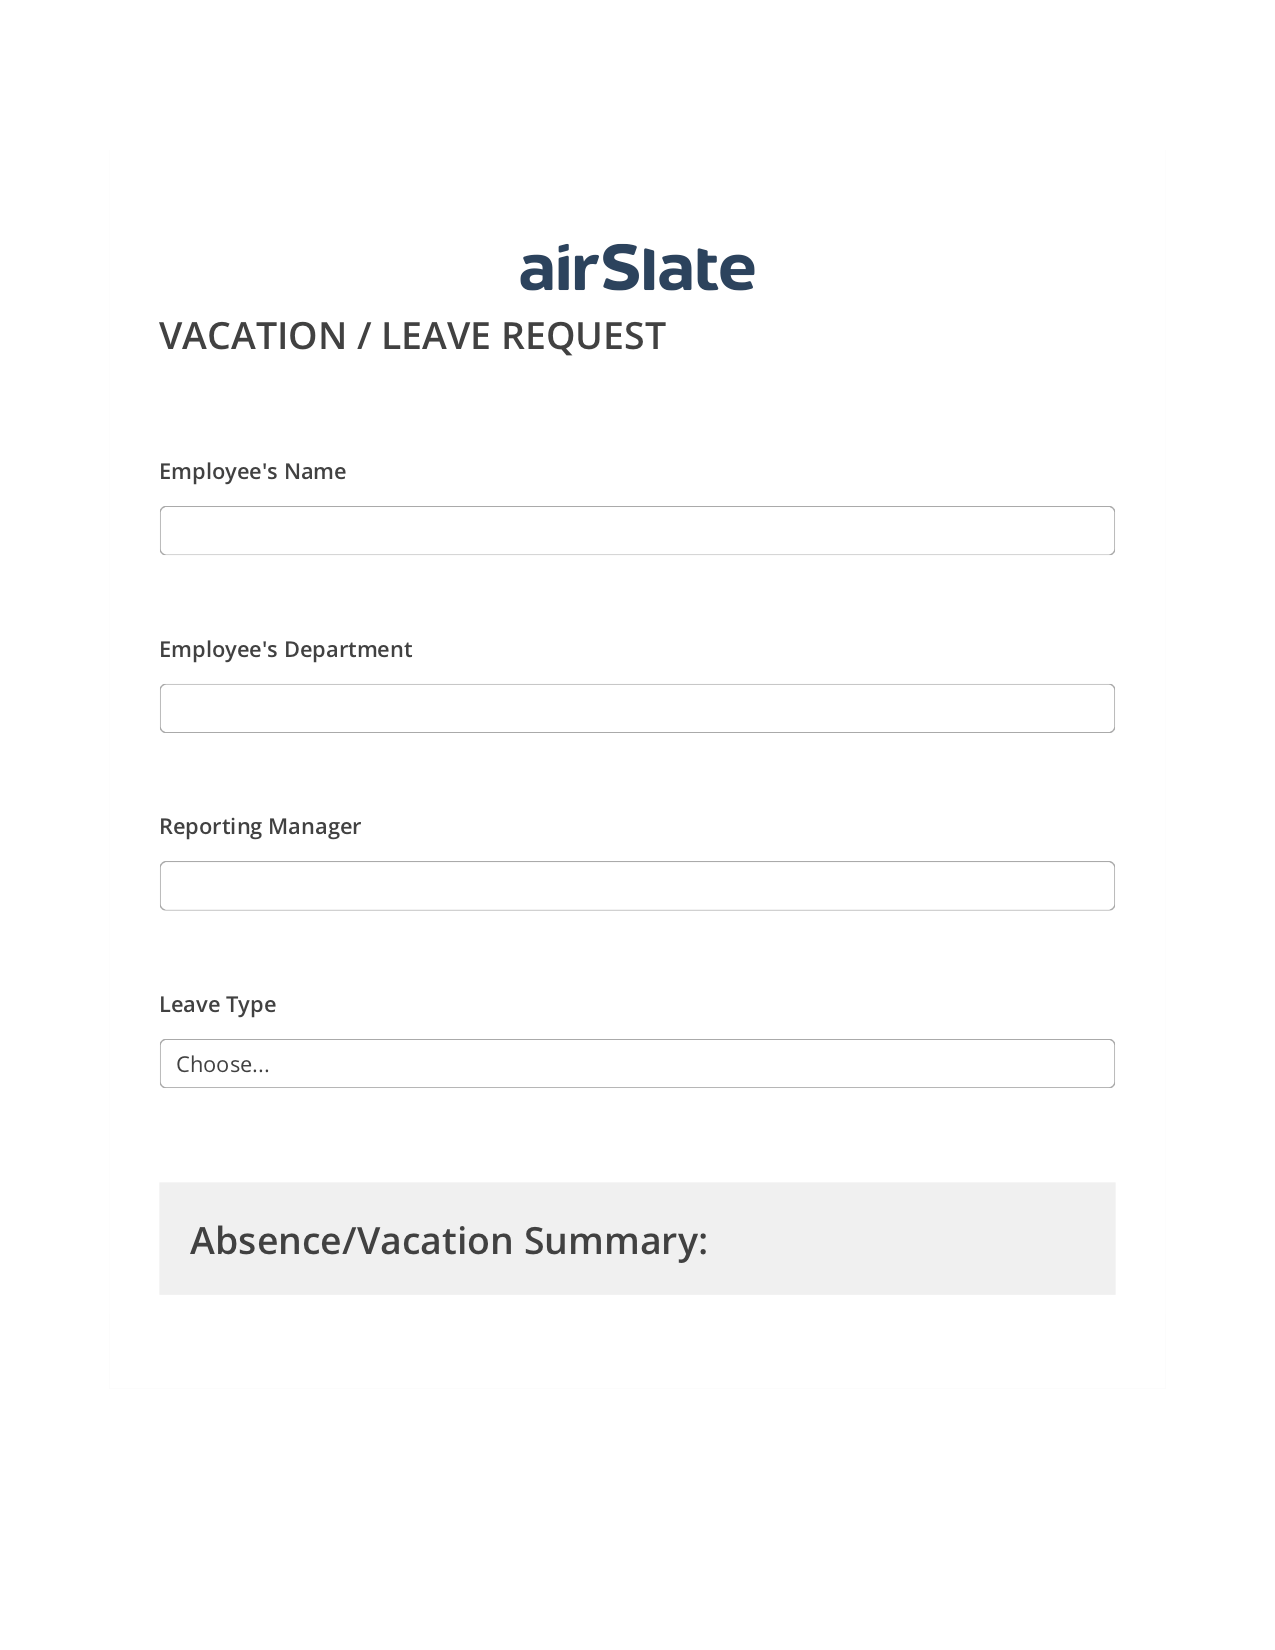 Vacation/Leave Request Workflow System Bot - Slack Two-Way Binding Bot, Jira Bot, Archive to SharePoint Folder Bot